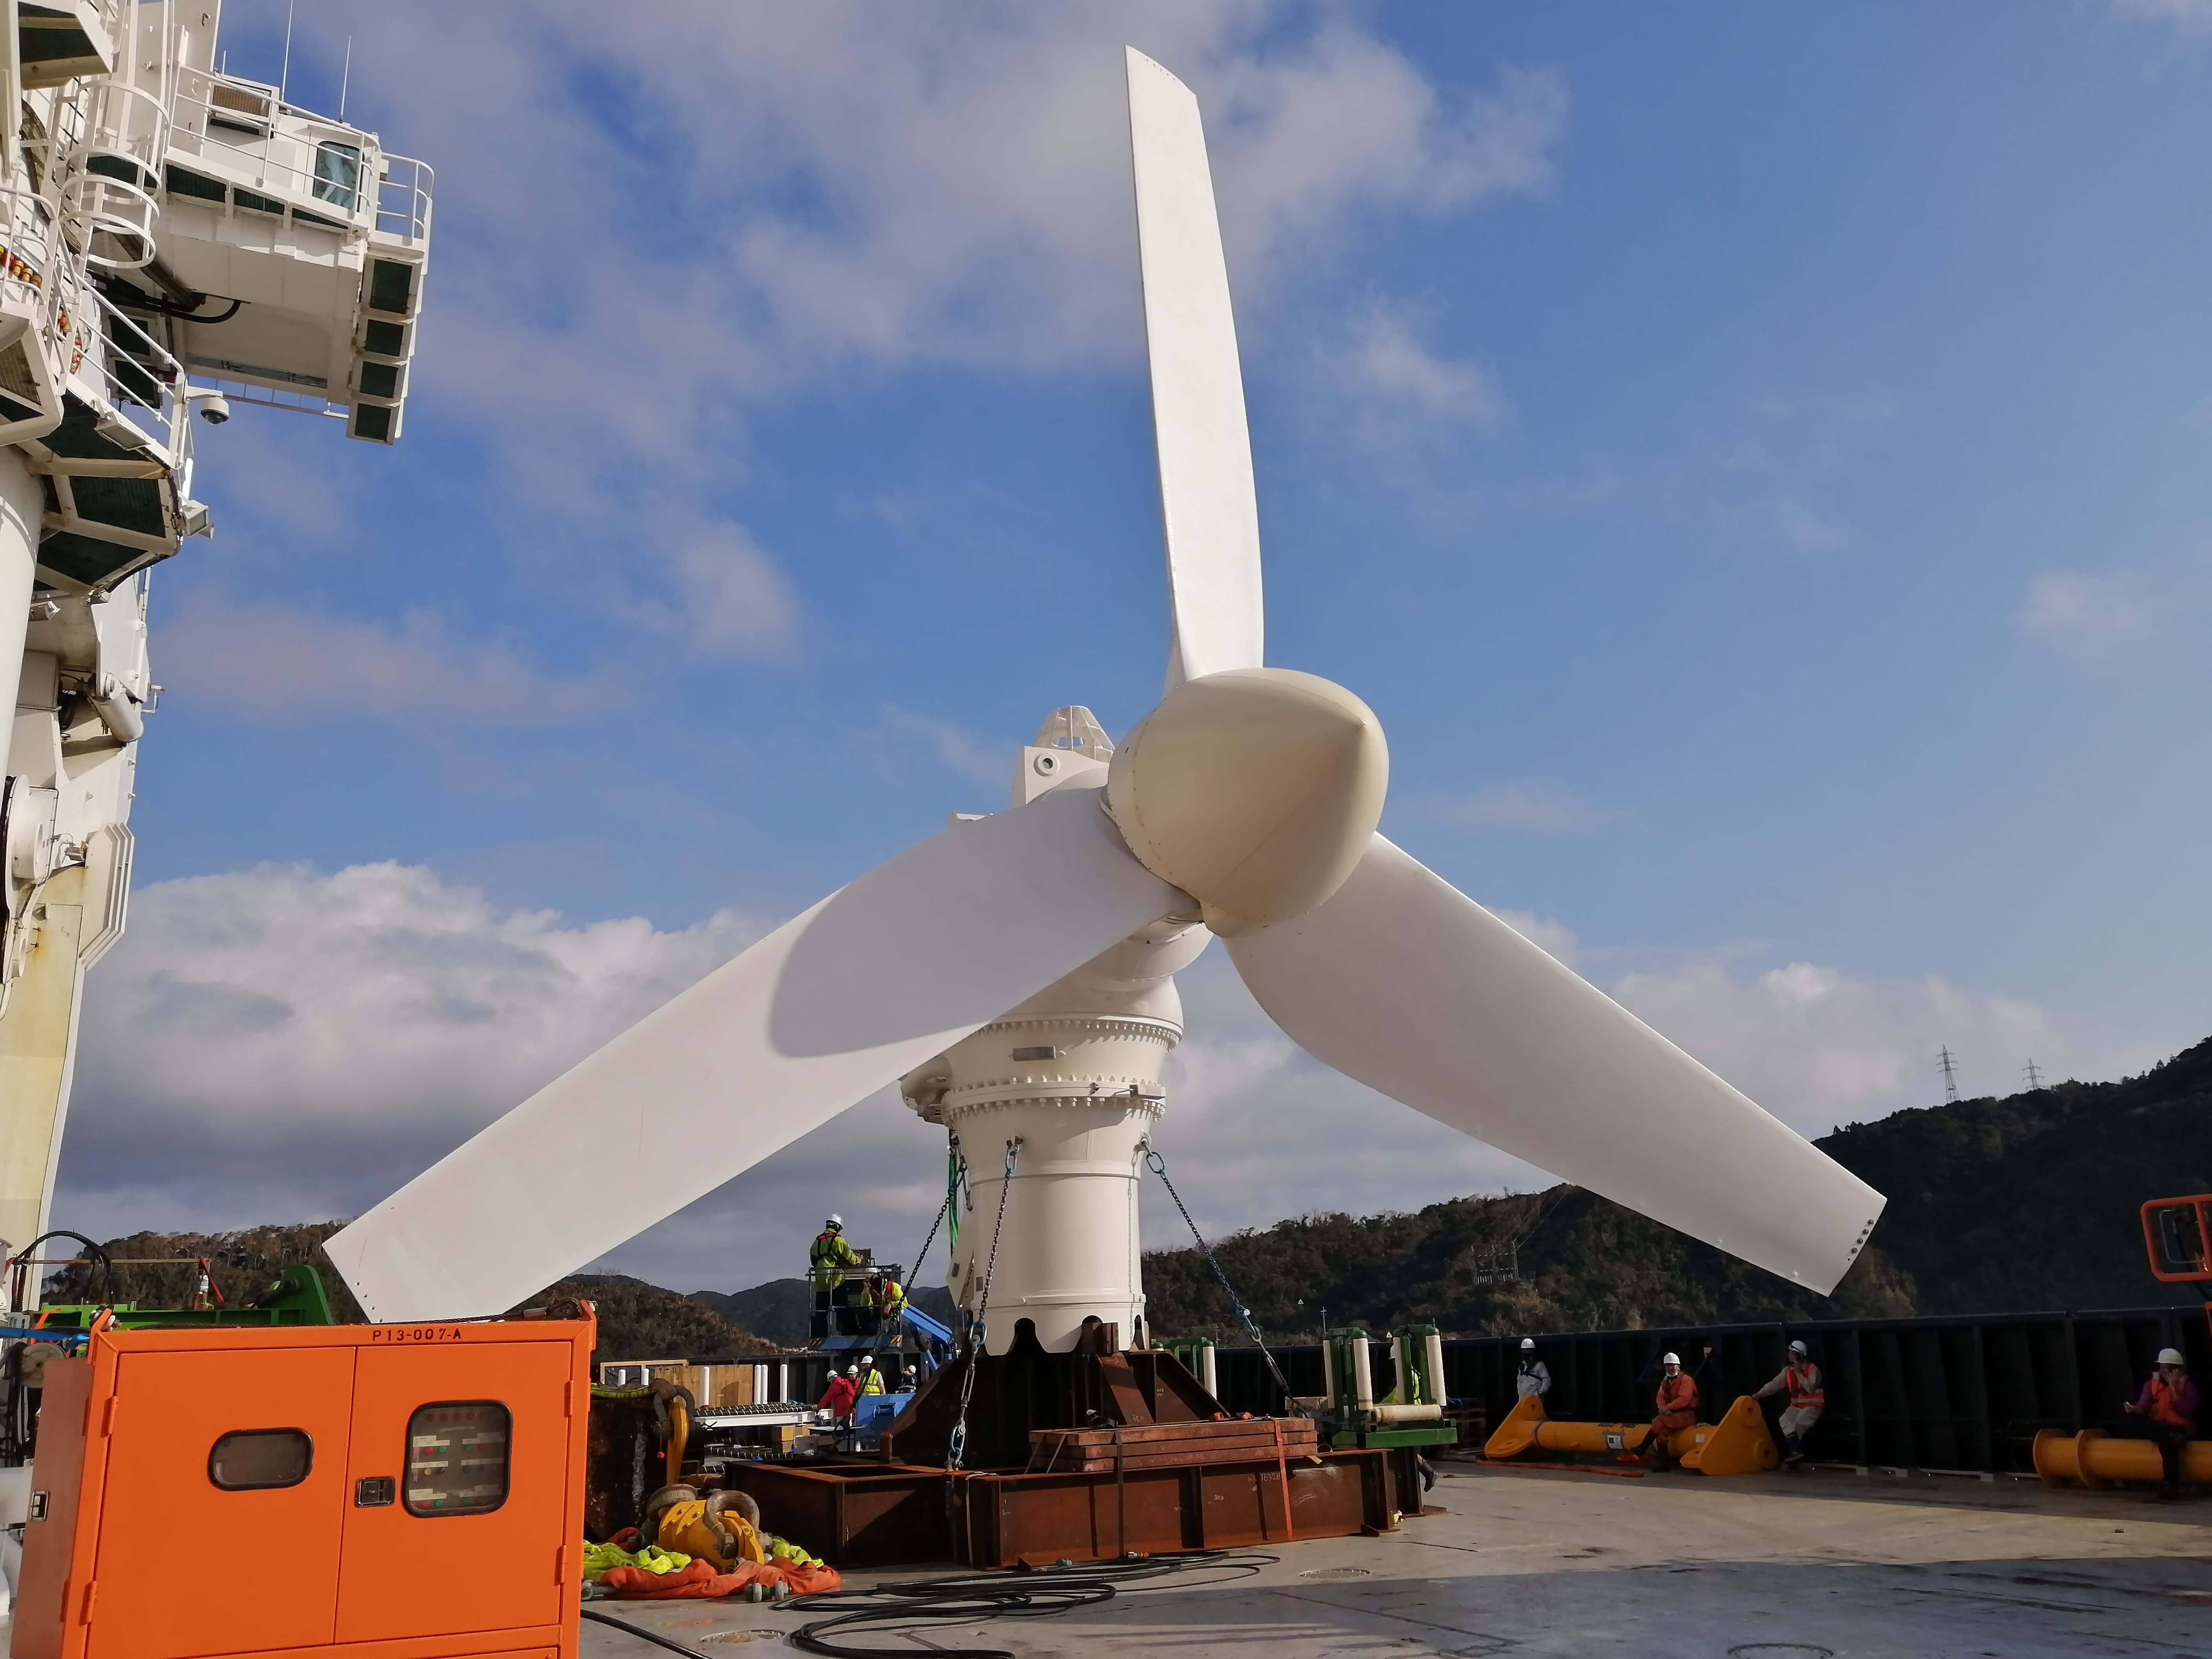 A tidal turbine built in Scotland is now producing power in Japan